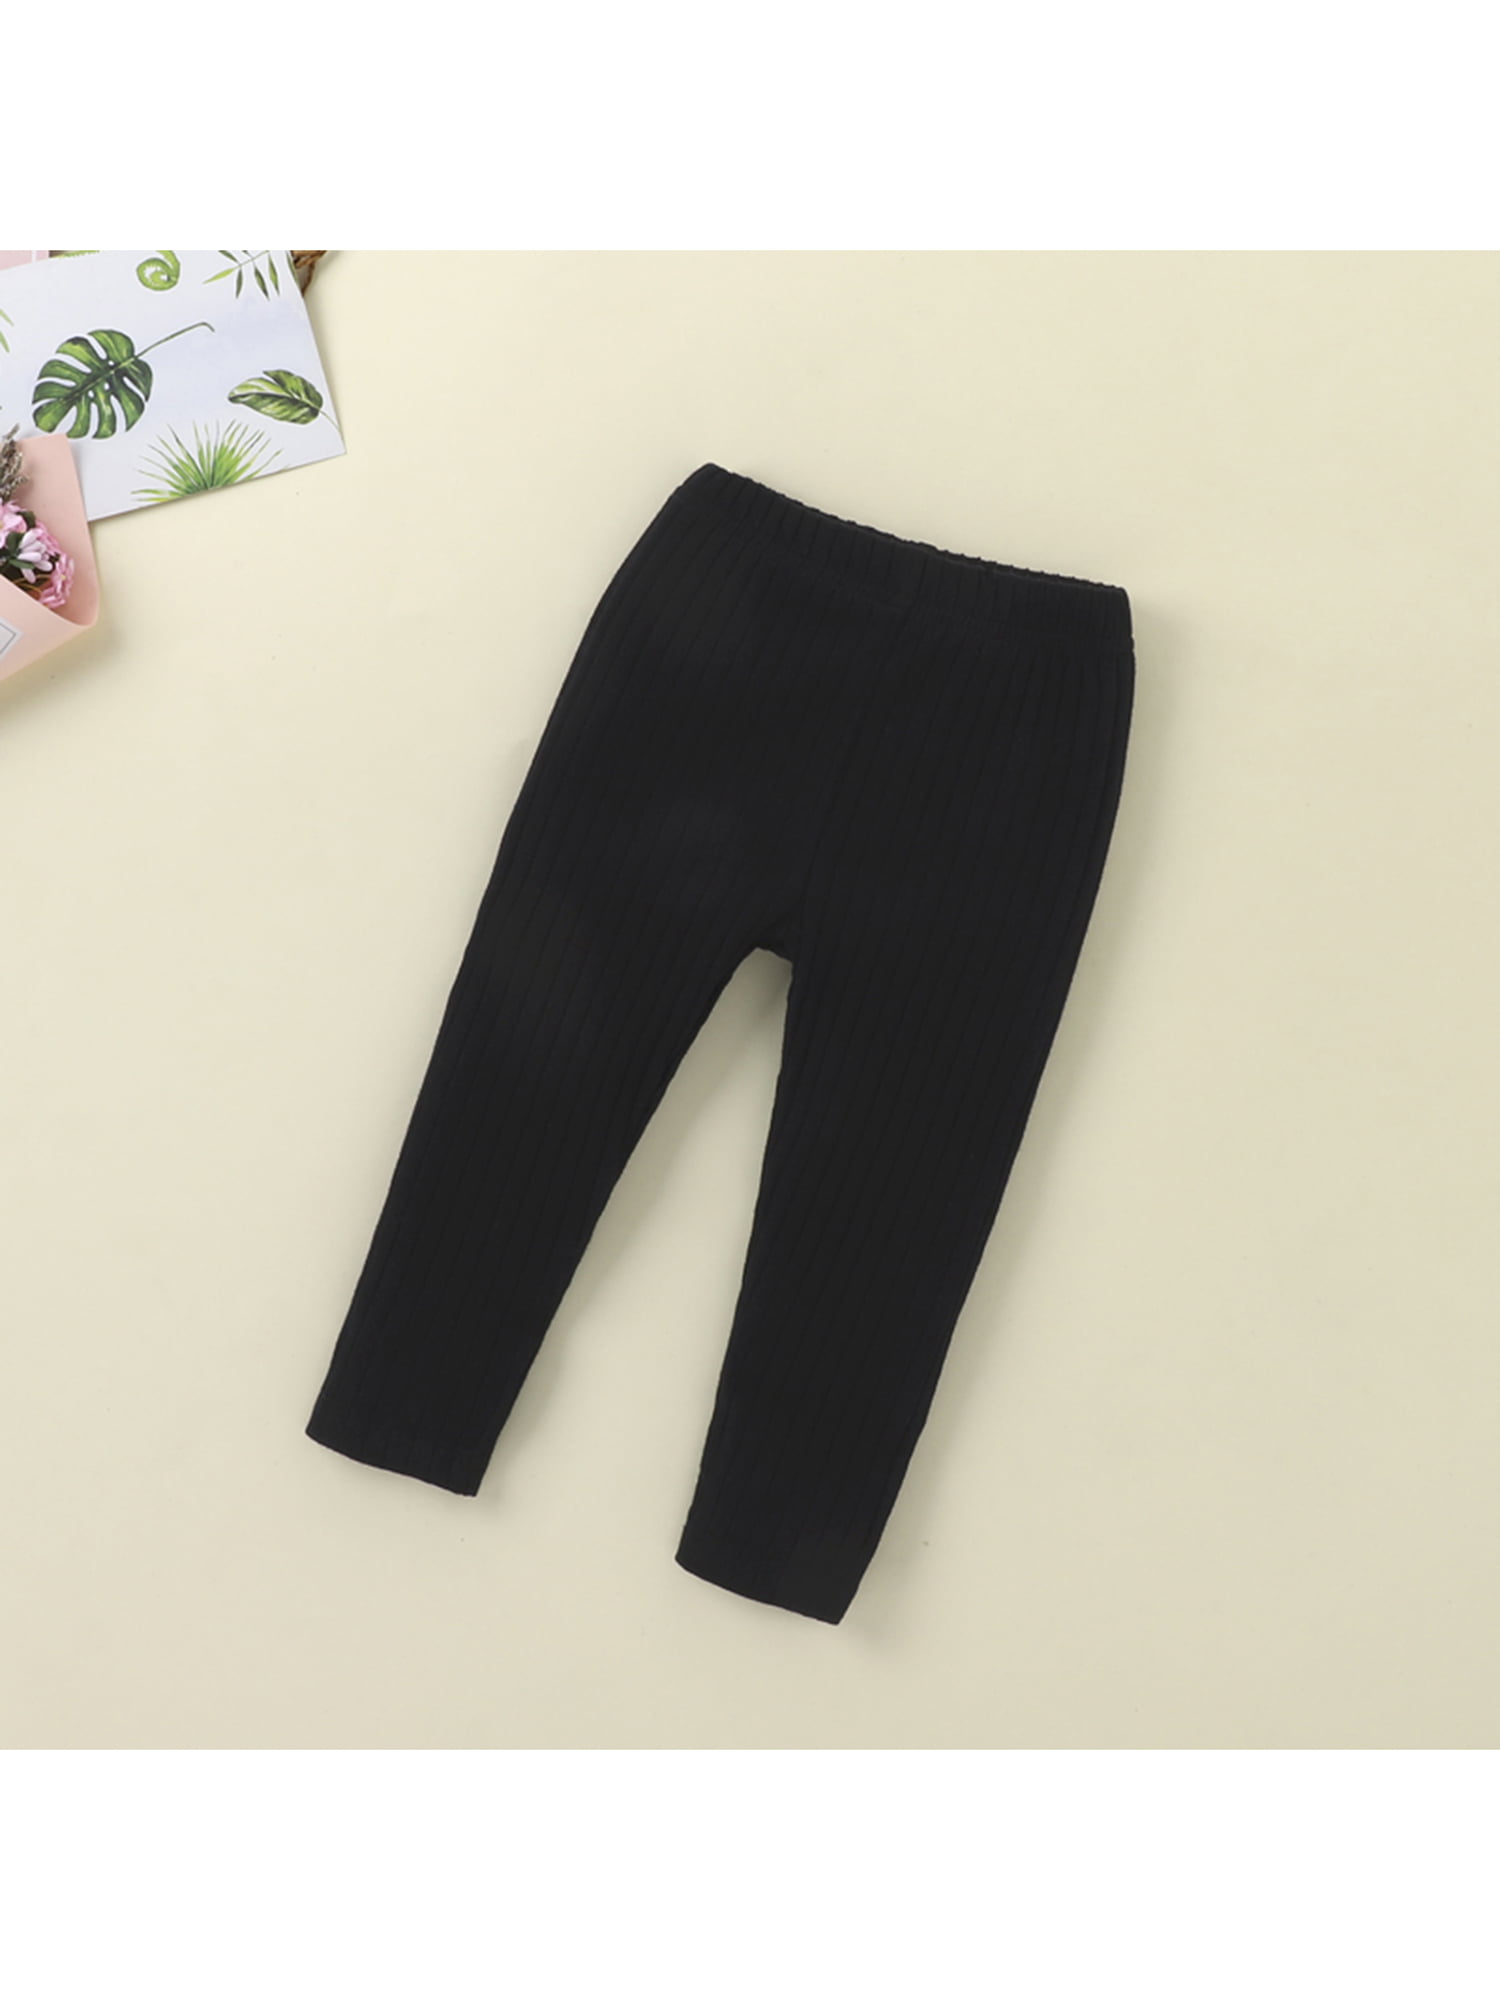 Mothercare Baby Boy & Girl's Leggings : Amazon.in: Clothing & Accessories